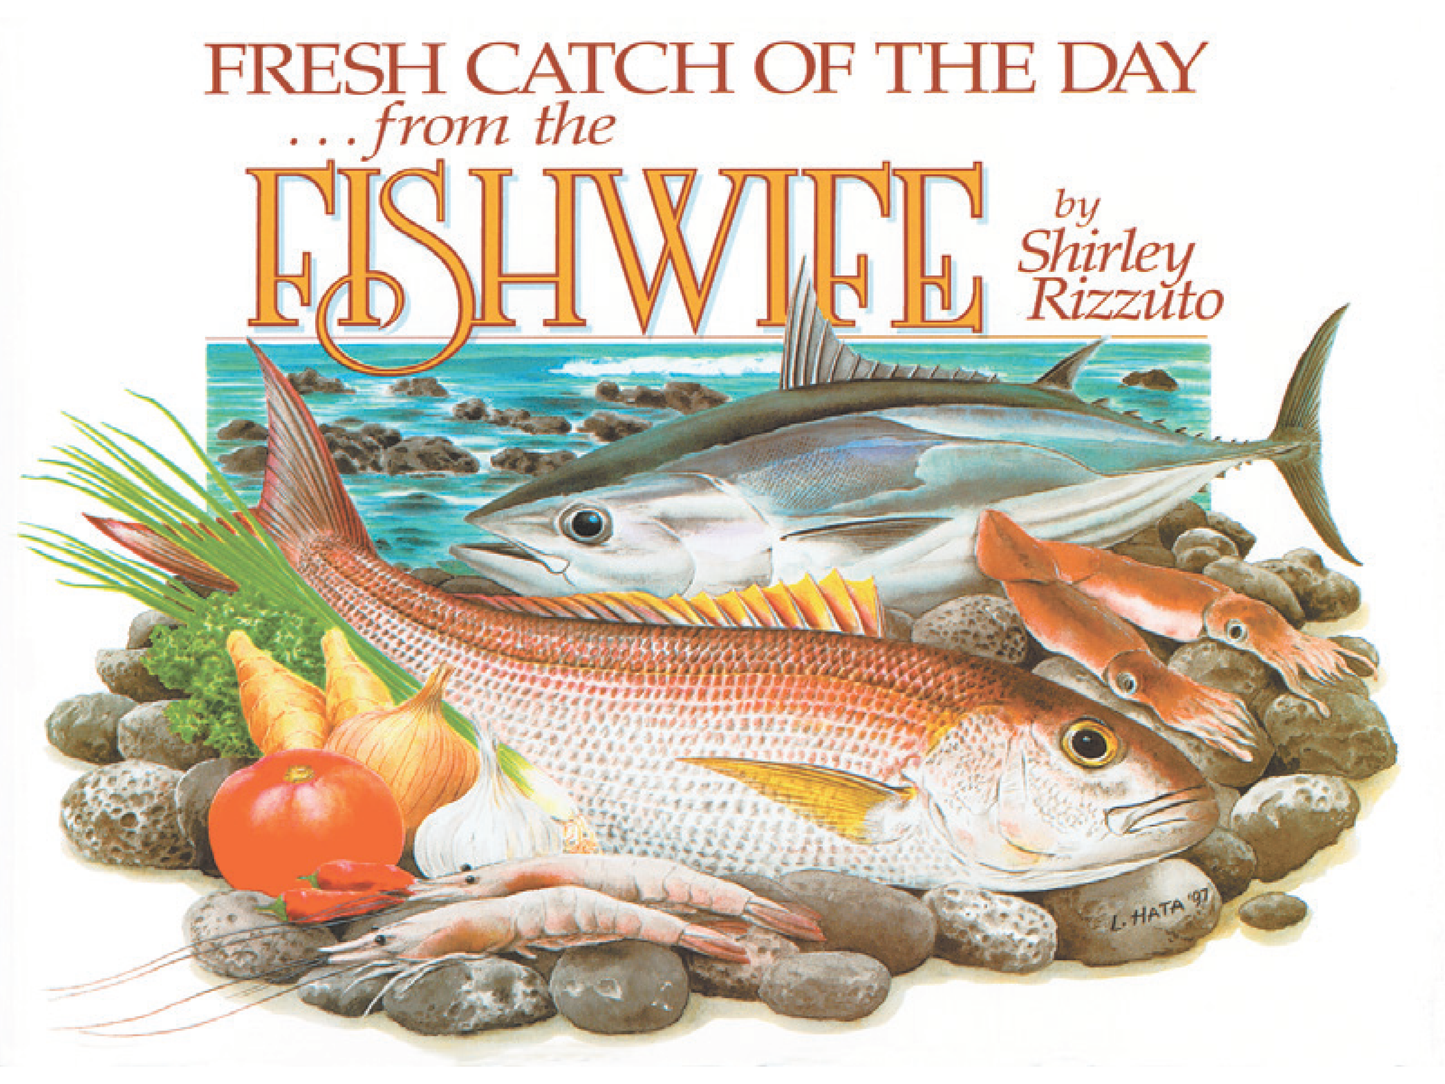 Fresh Catch of the Day...from the Fishwife - BOOK SALE - LIMITED